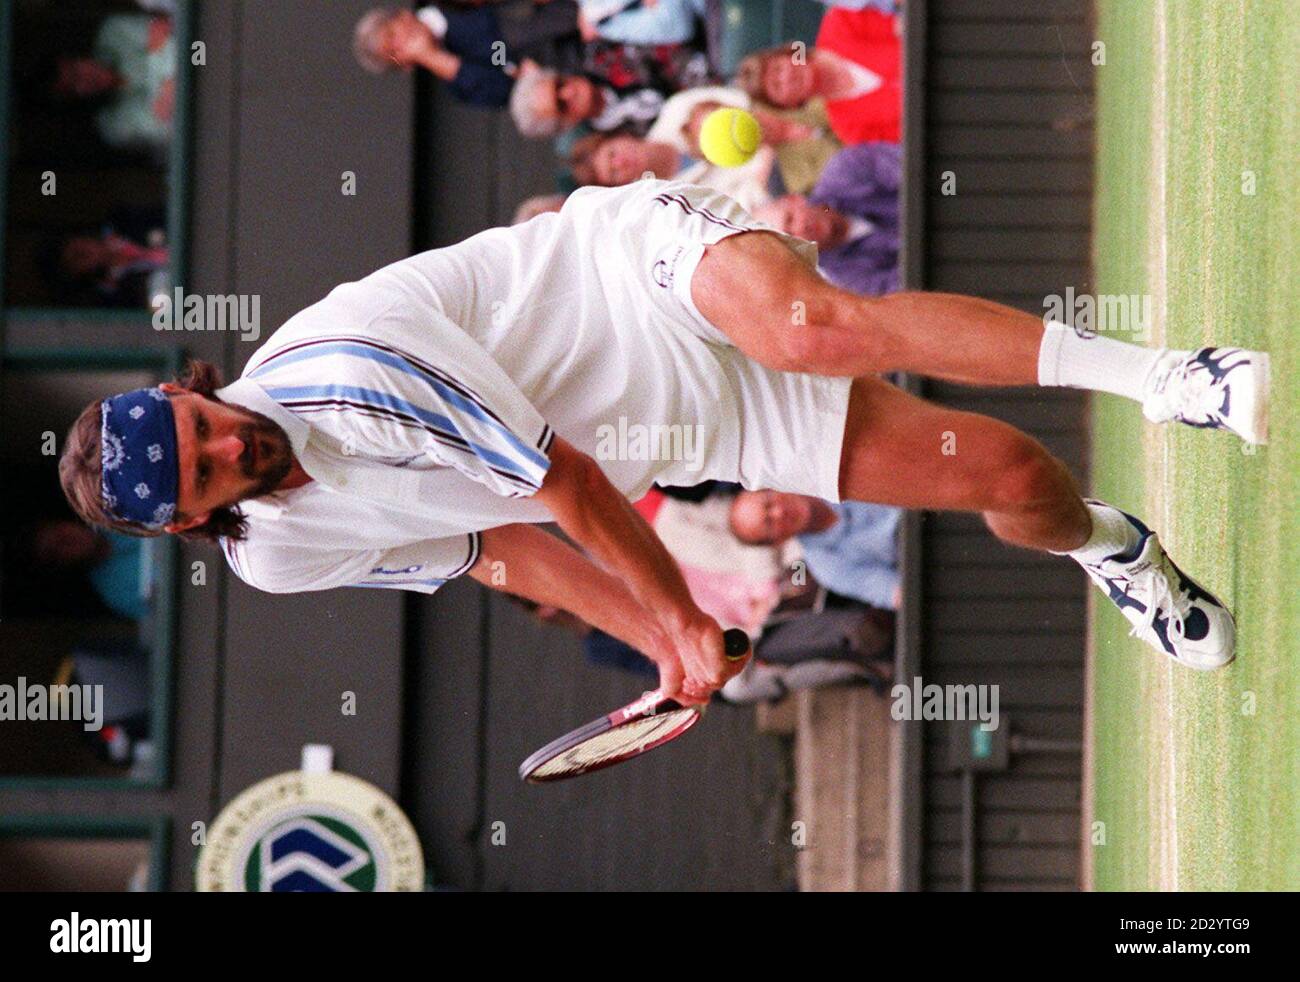 Goran Ivanisevic in action during the first set of the Mens semi-final match at Wimbledon, today (Friday) against Richard Krayicek 